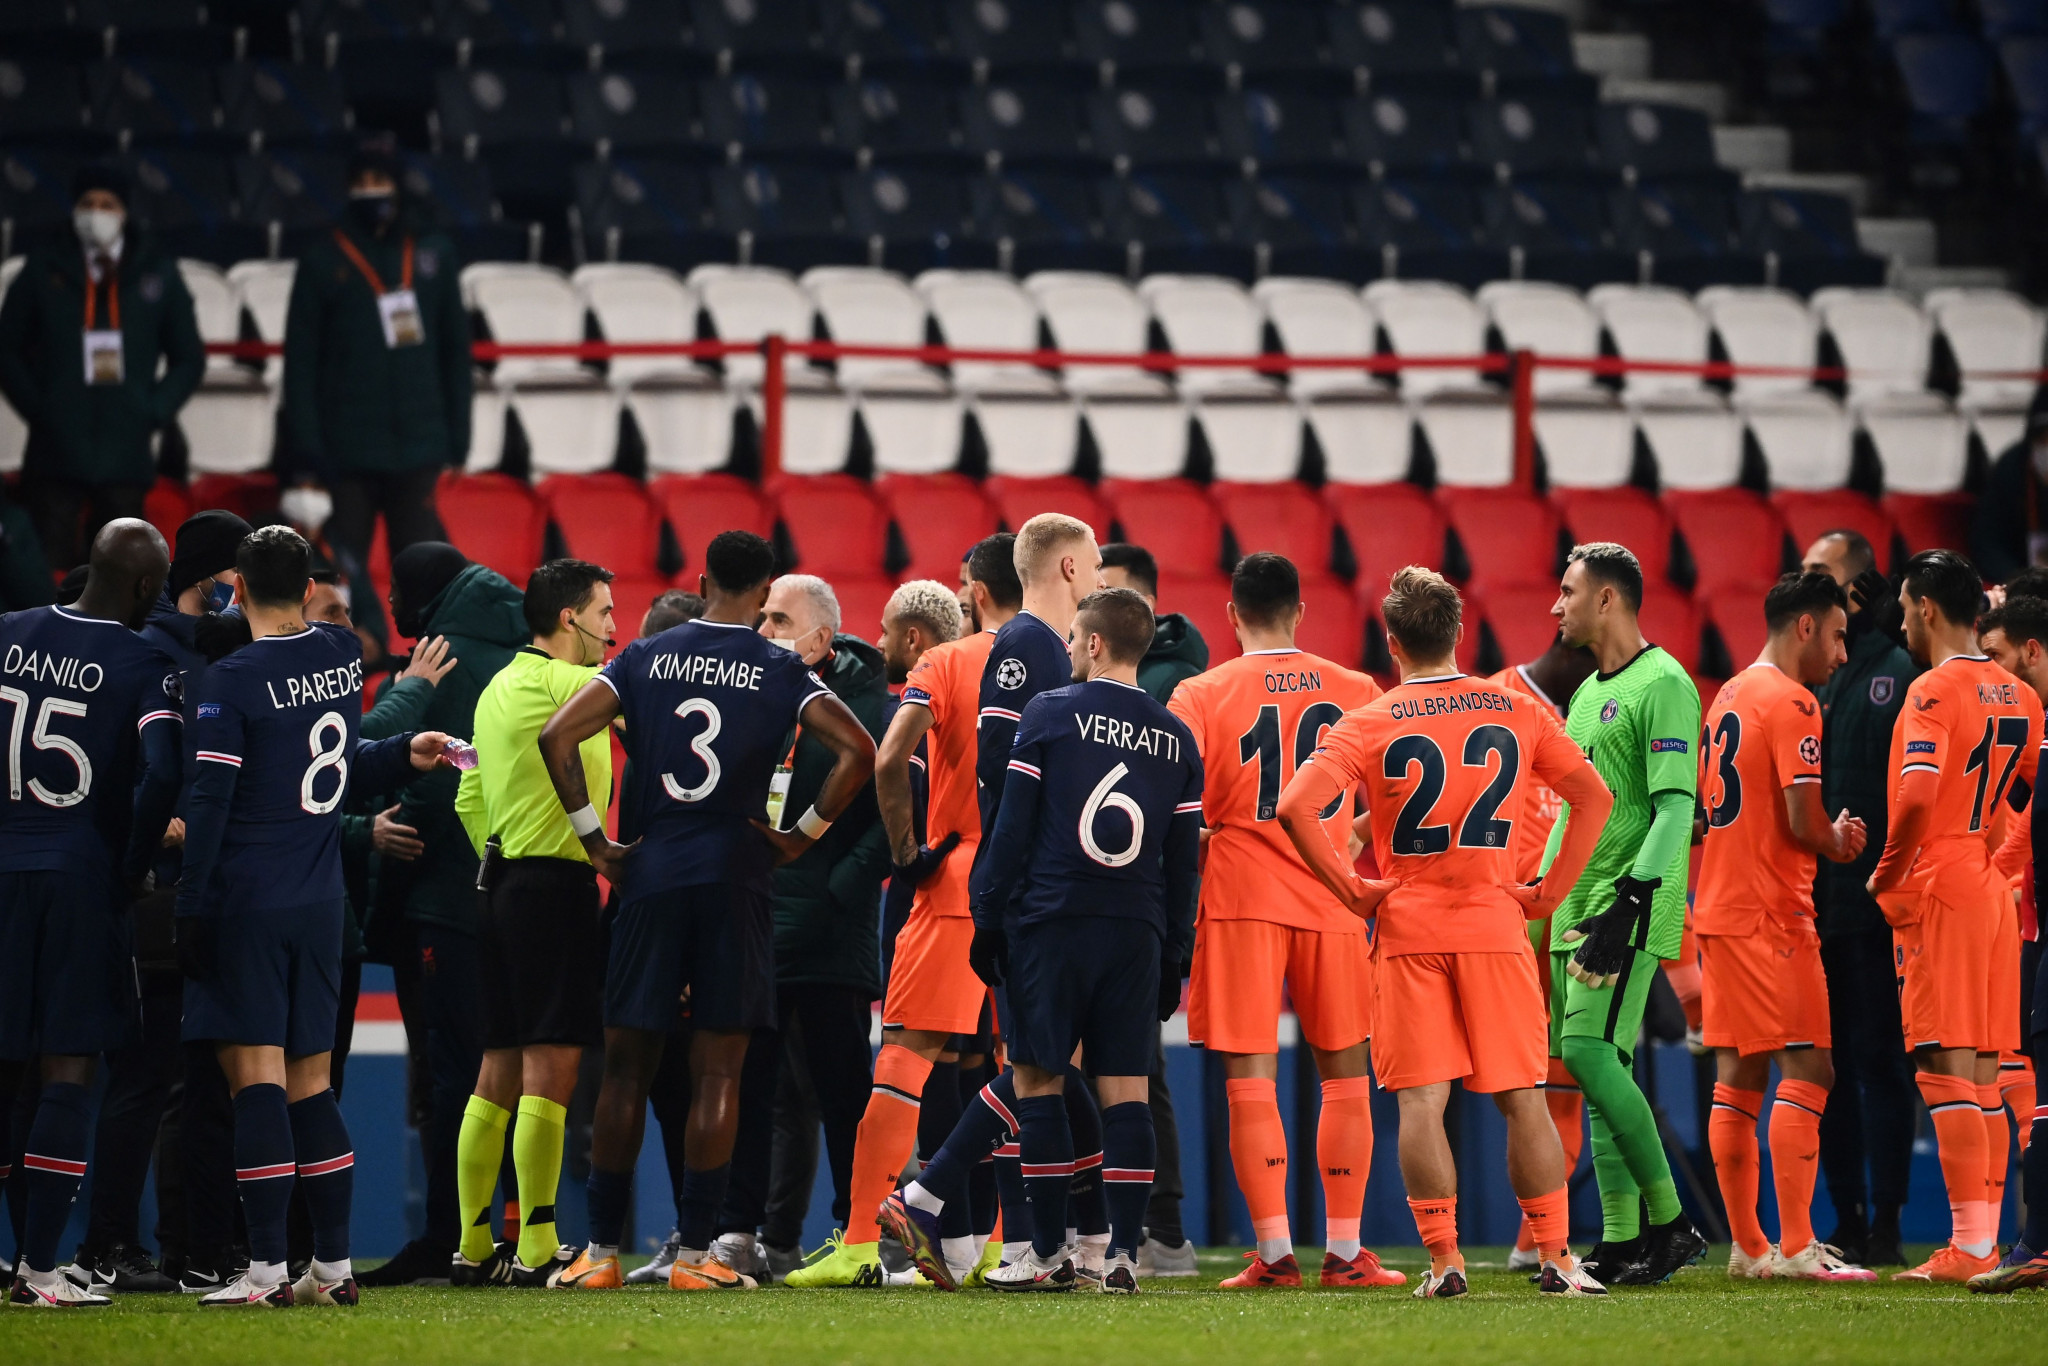 PSG and Başakşehir make anti-racism stance before completing match suspended over fourth official comment